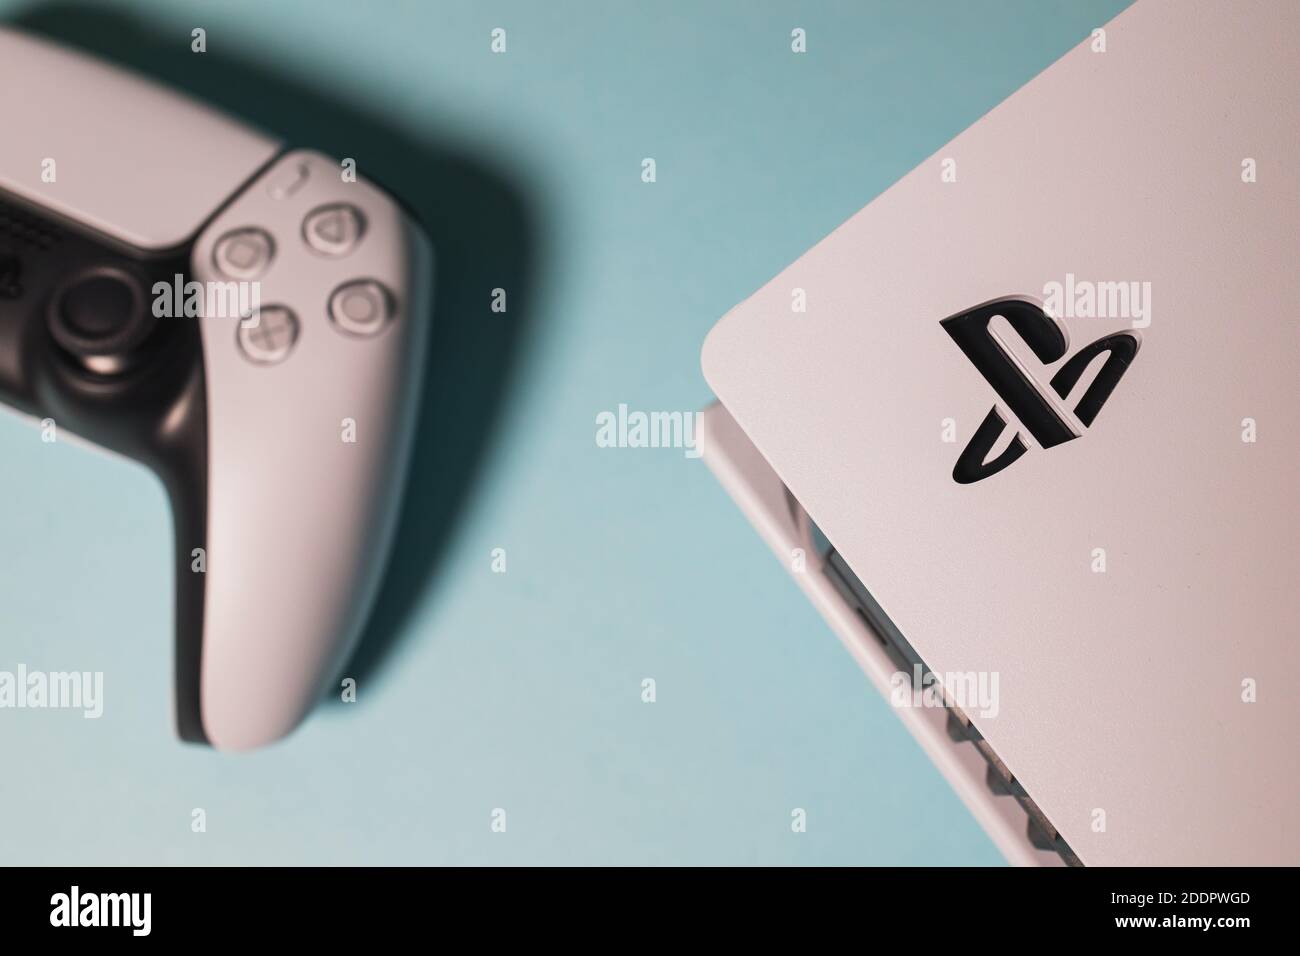 LONDON - NOVEMBER 24, 2020: PlayStation 5 video games console and PS5  controller Stock Photo - Alamy